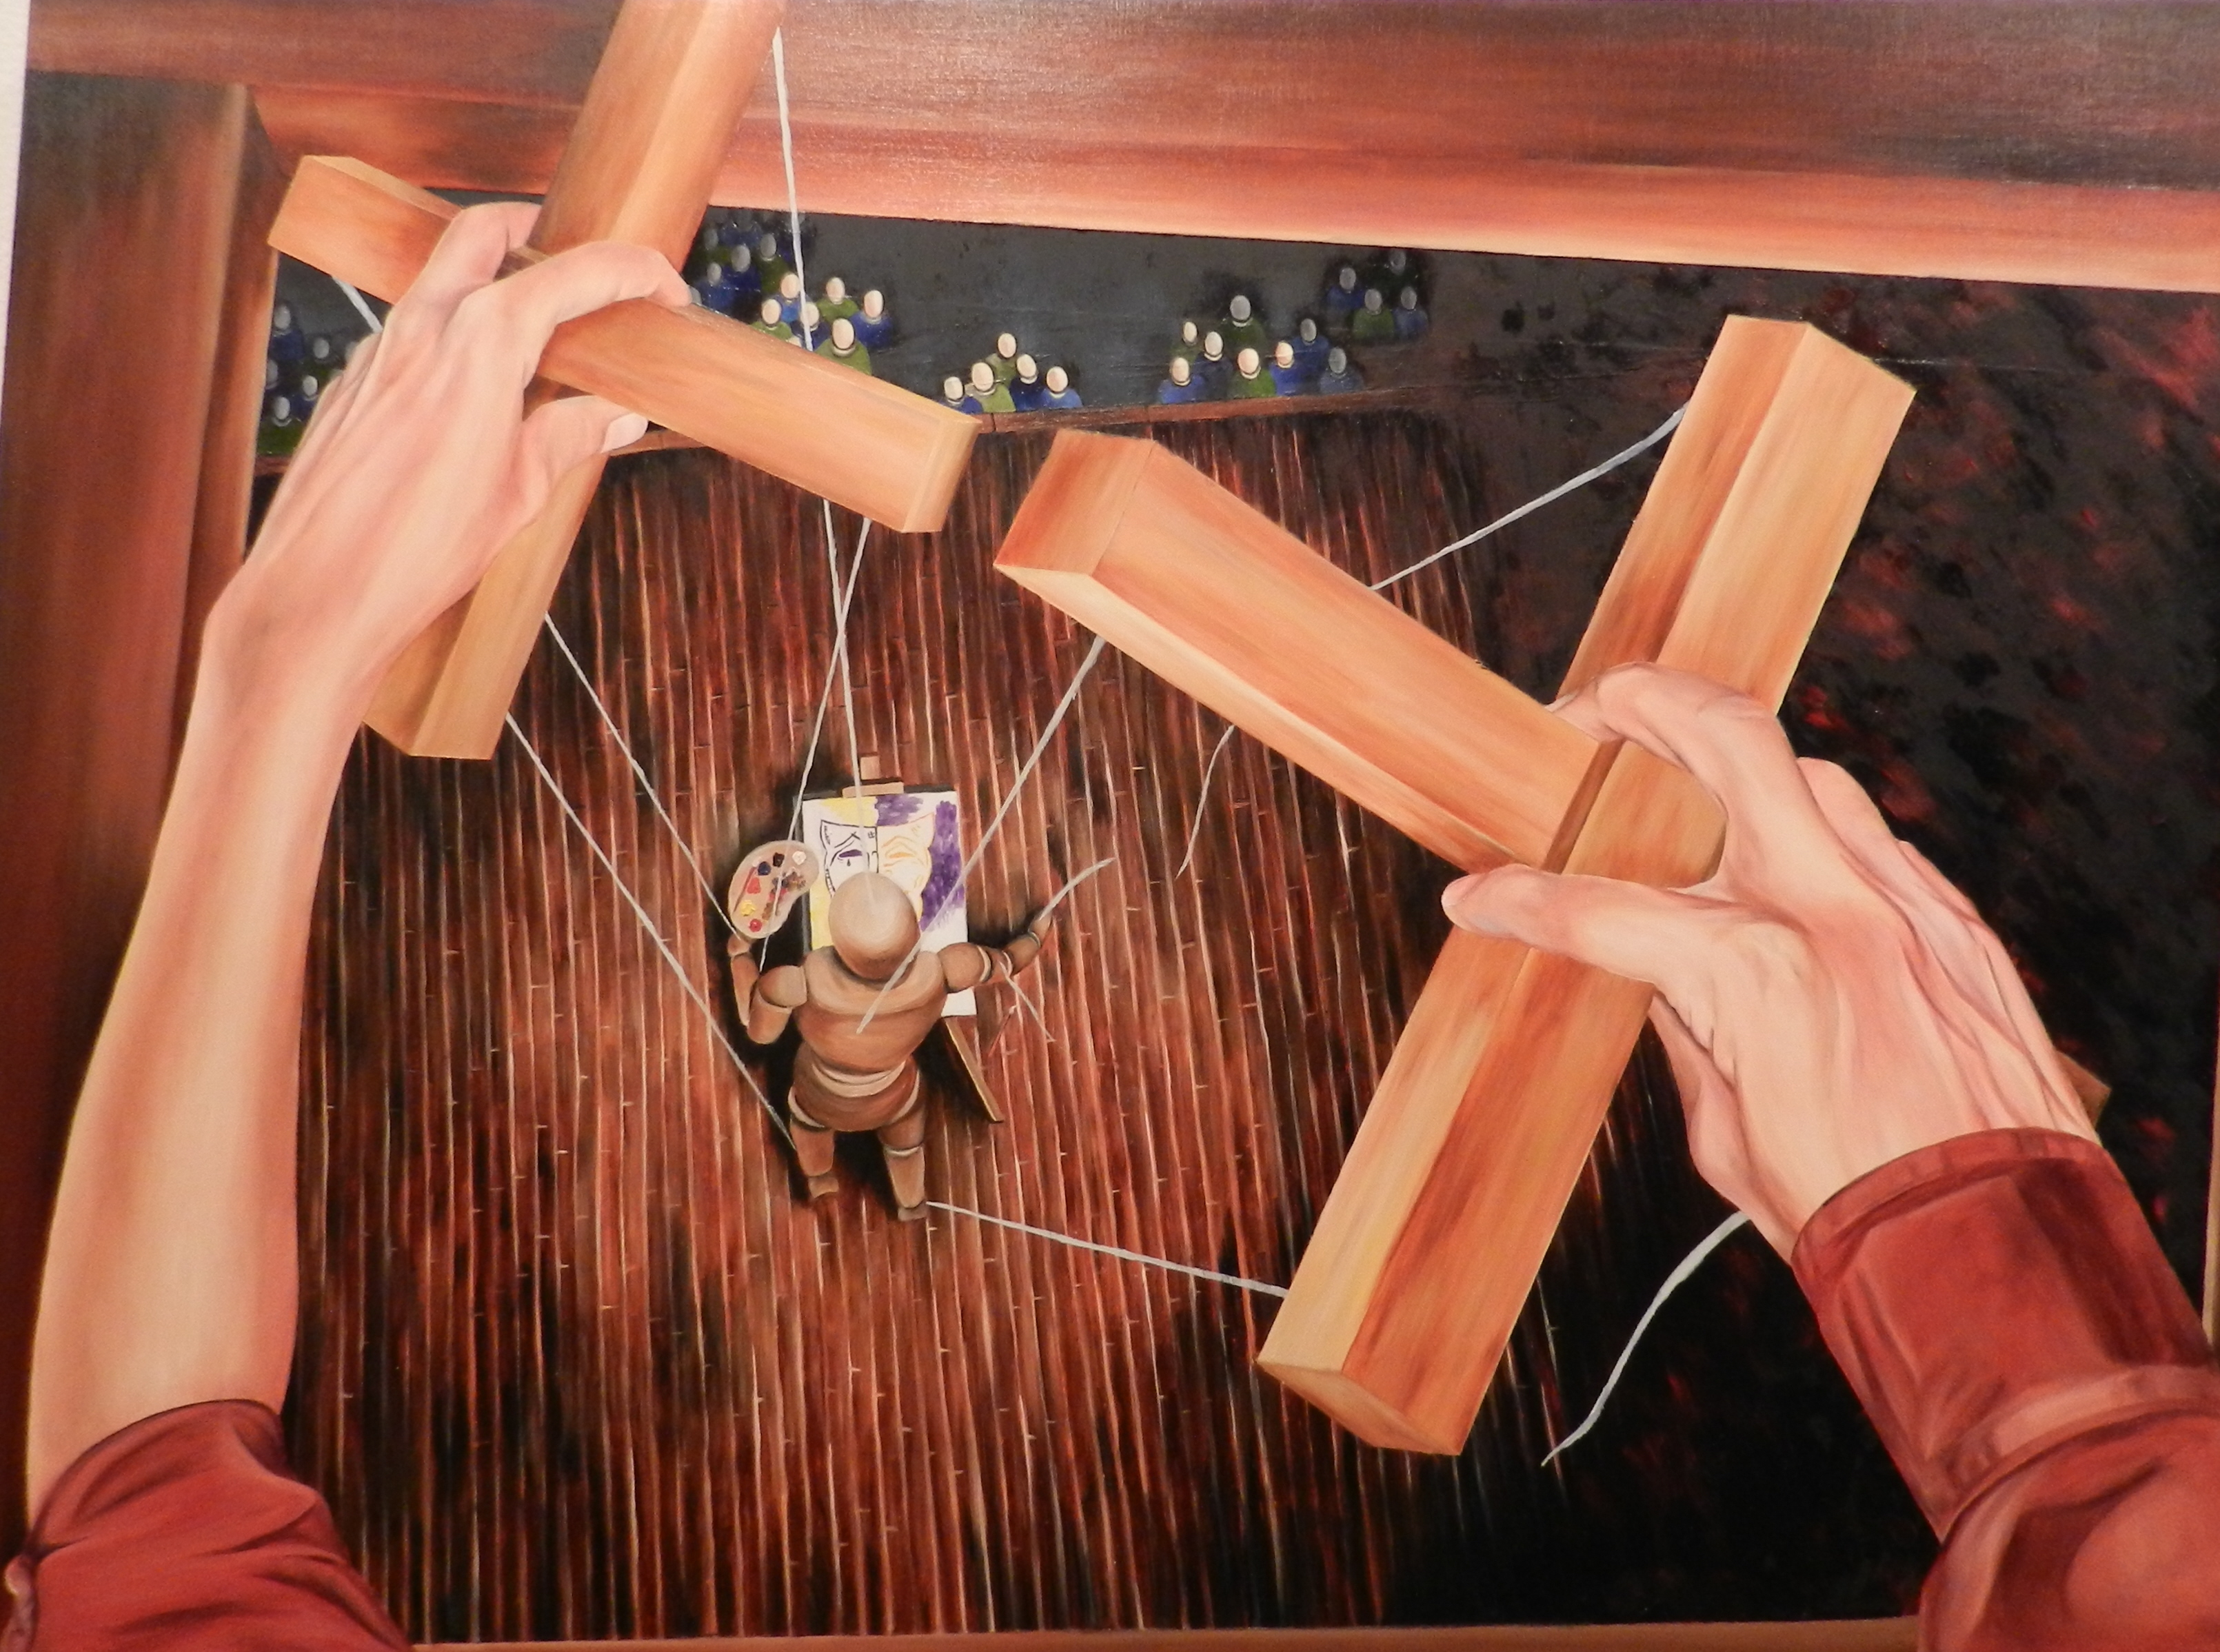 Allegory by Aziz Ashayeb. Oil on wood